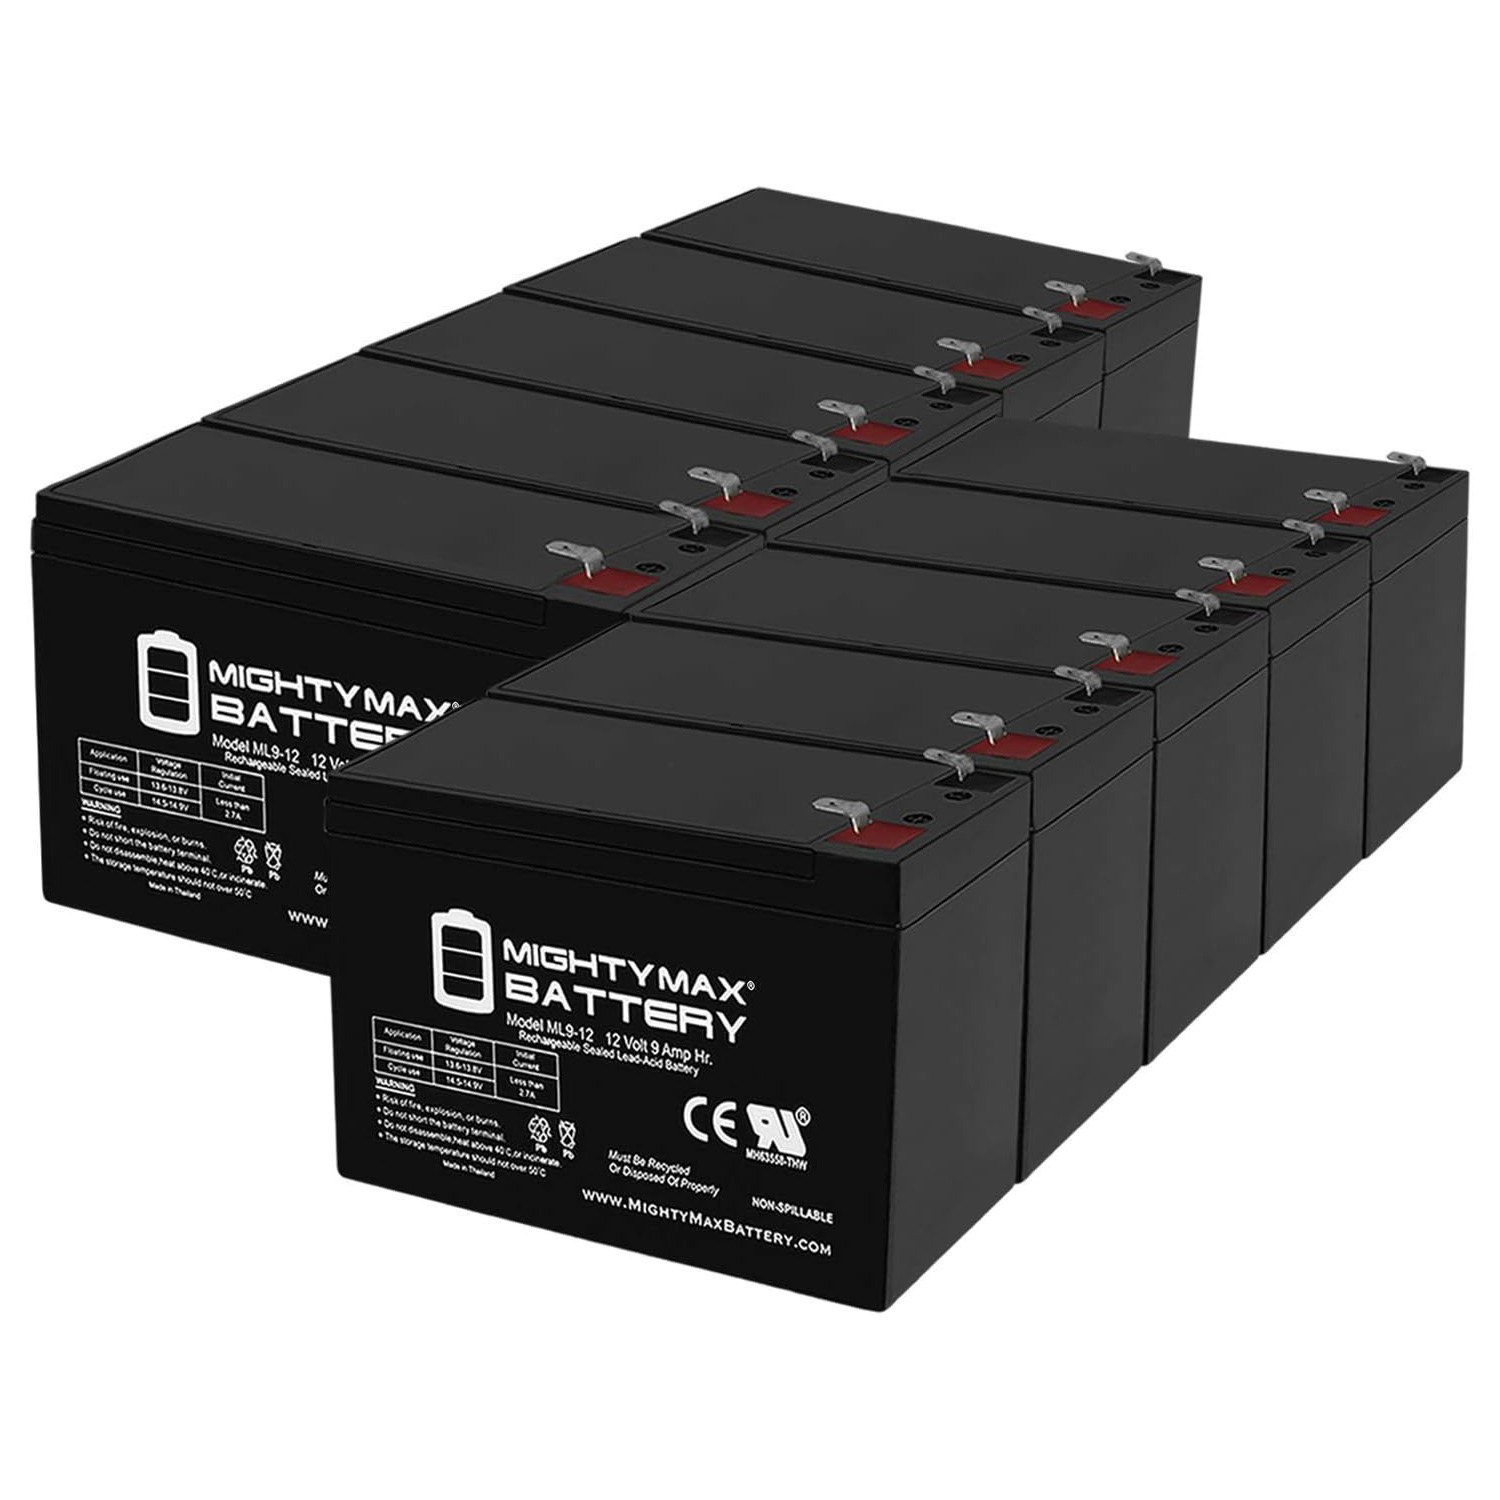 Altronix SMP3PMCTXPD16 12V, 9Ah Lead Acid Battery - 10 Pack